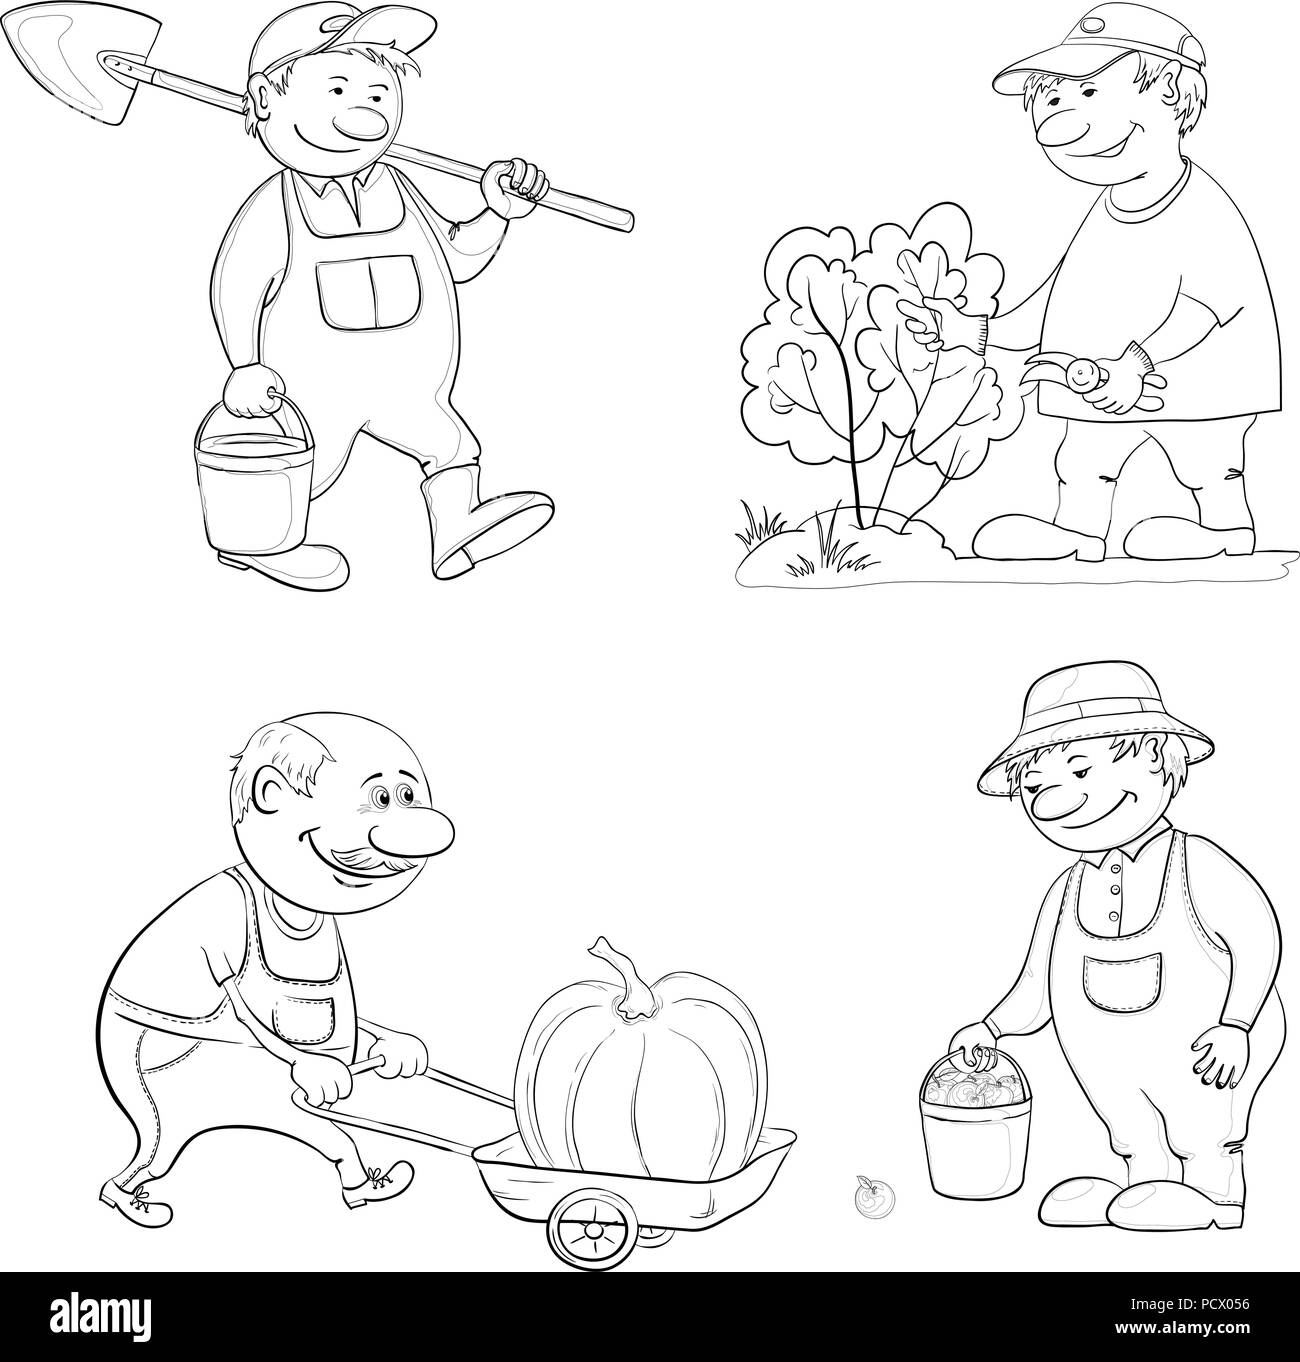 Cartoon Gardeners Work with a Bucket and Spade, Cuts a Bush with Secateurs, Carries Trolley with Pumpkin, with Harvest of Apples. Black Contour on White Background, Black Contours Isolated on White Background. Vector Stock Vector